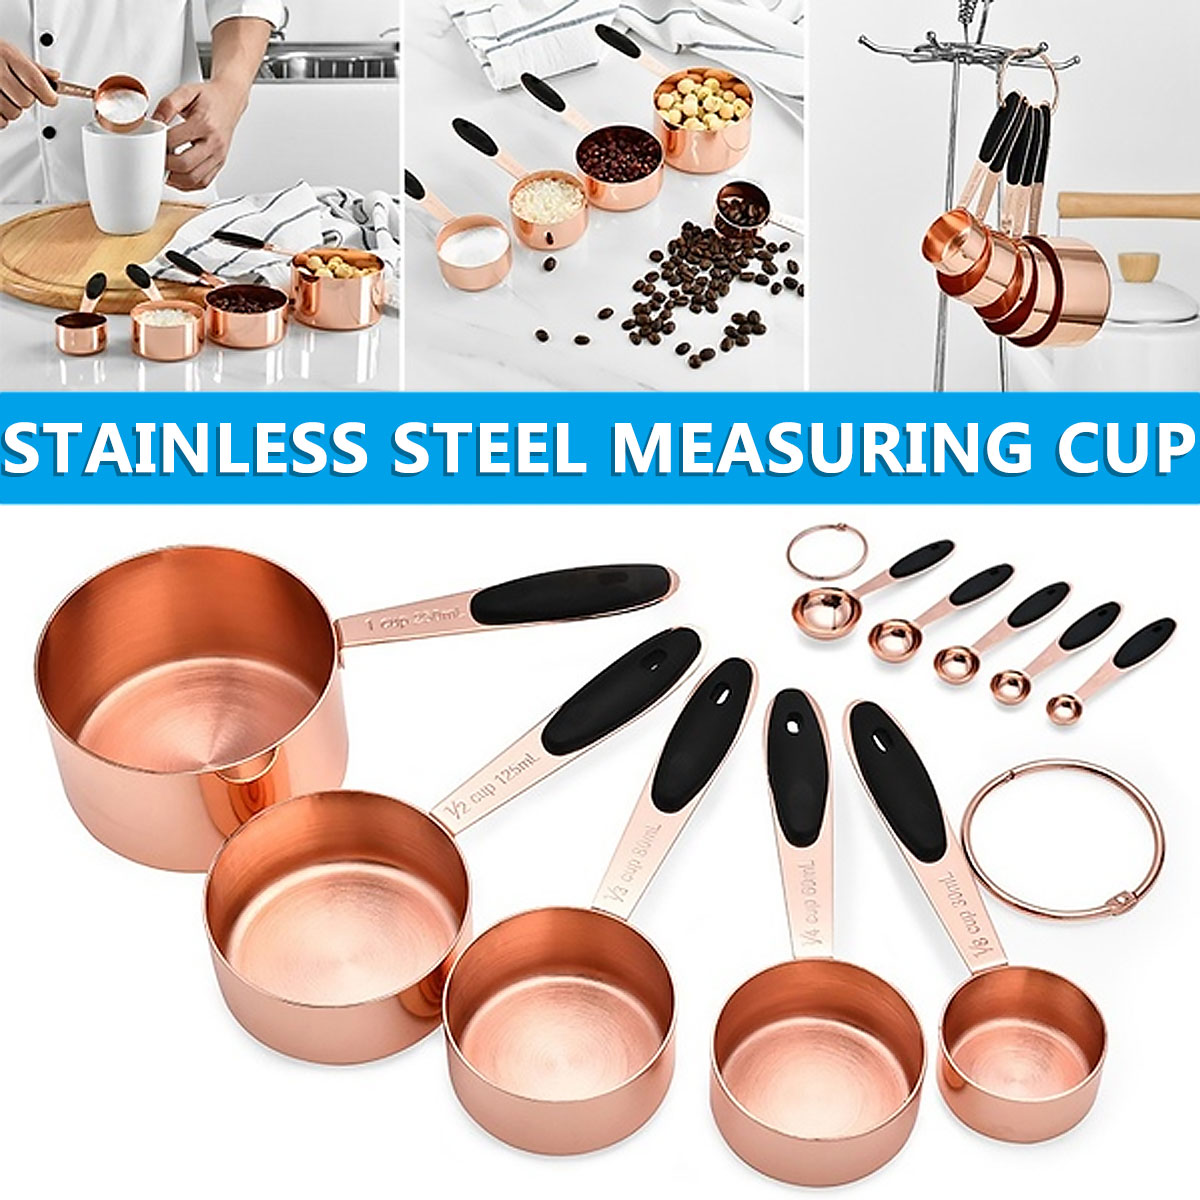 5Pcs-Measuring-Cup-Set-Stainless-Steel-Kitchen-Accessories-Baking-Bartending-Tools-1722150-1